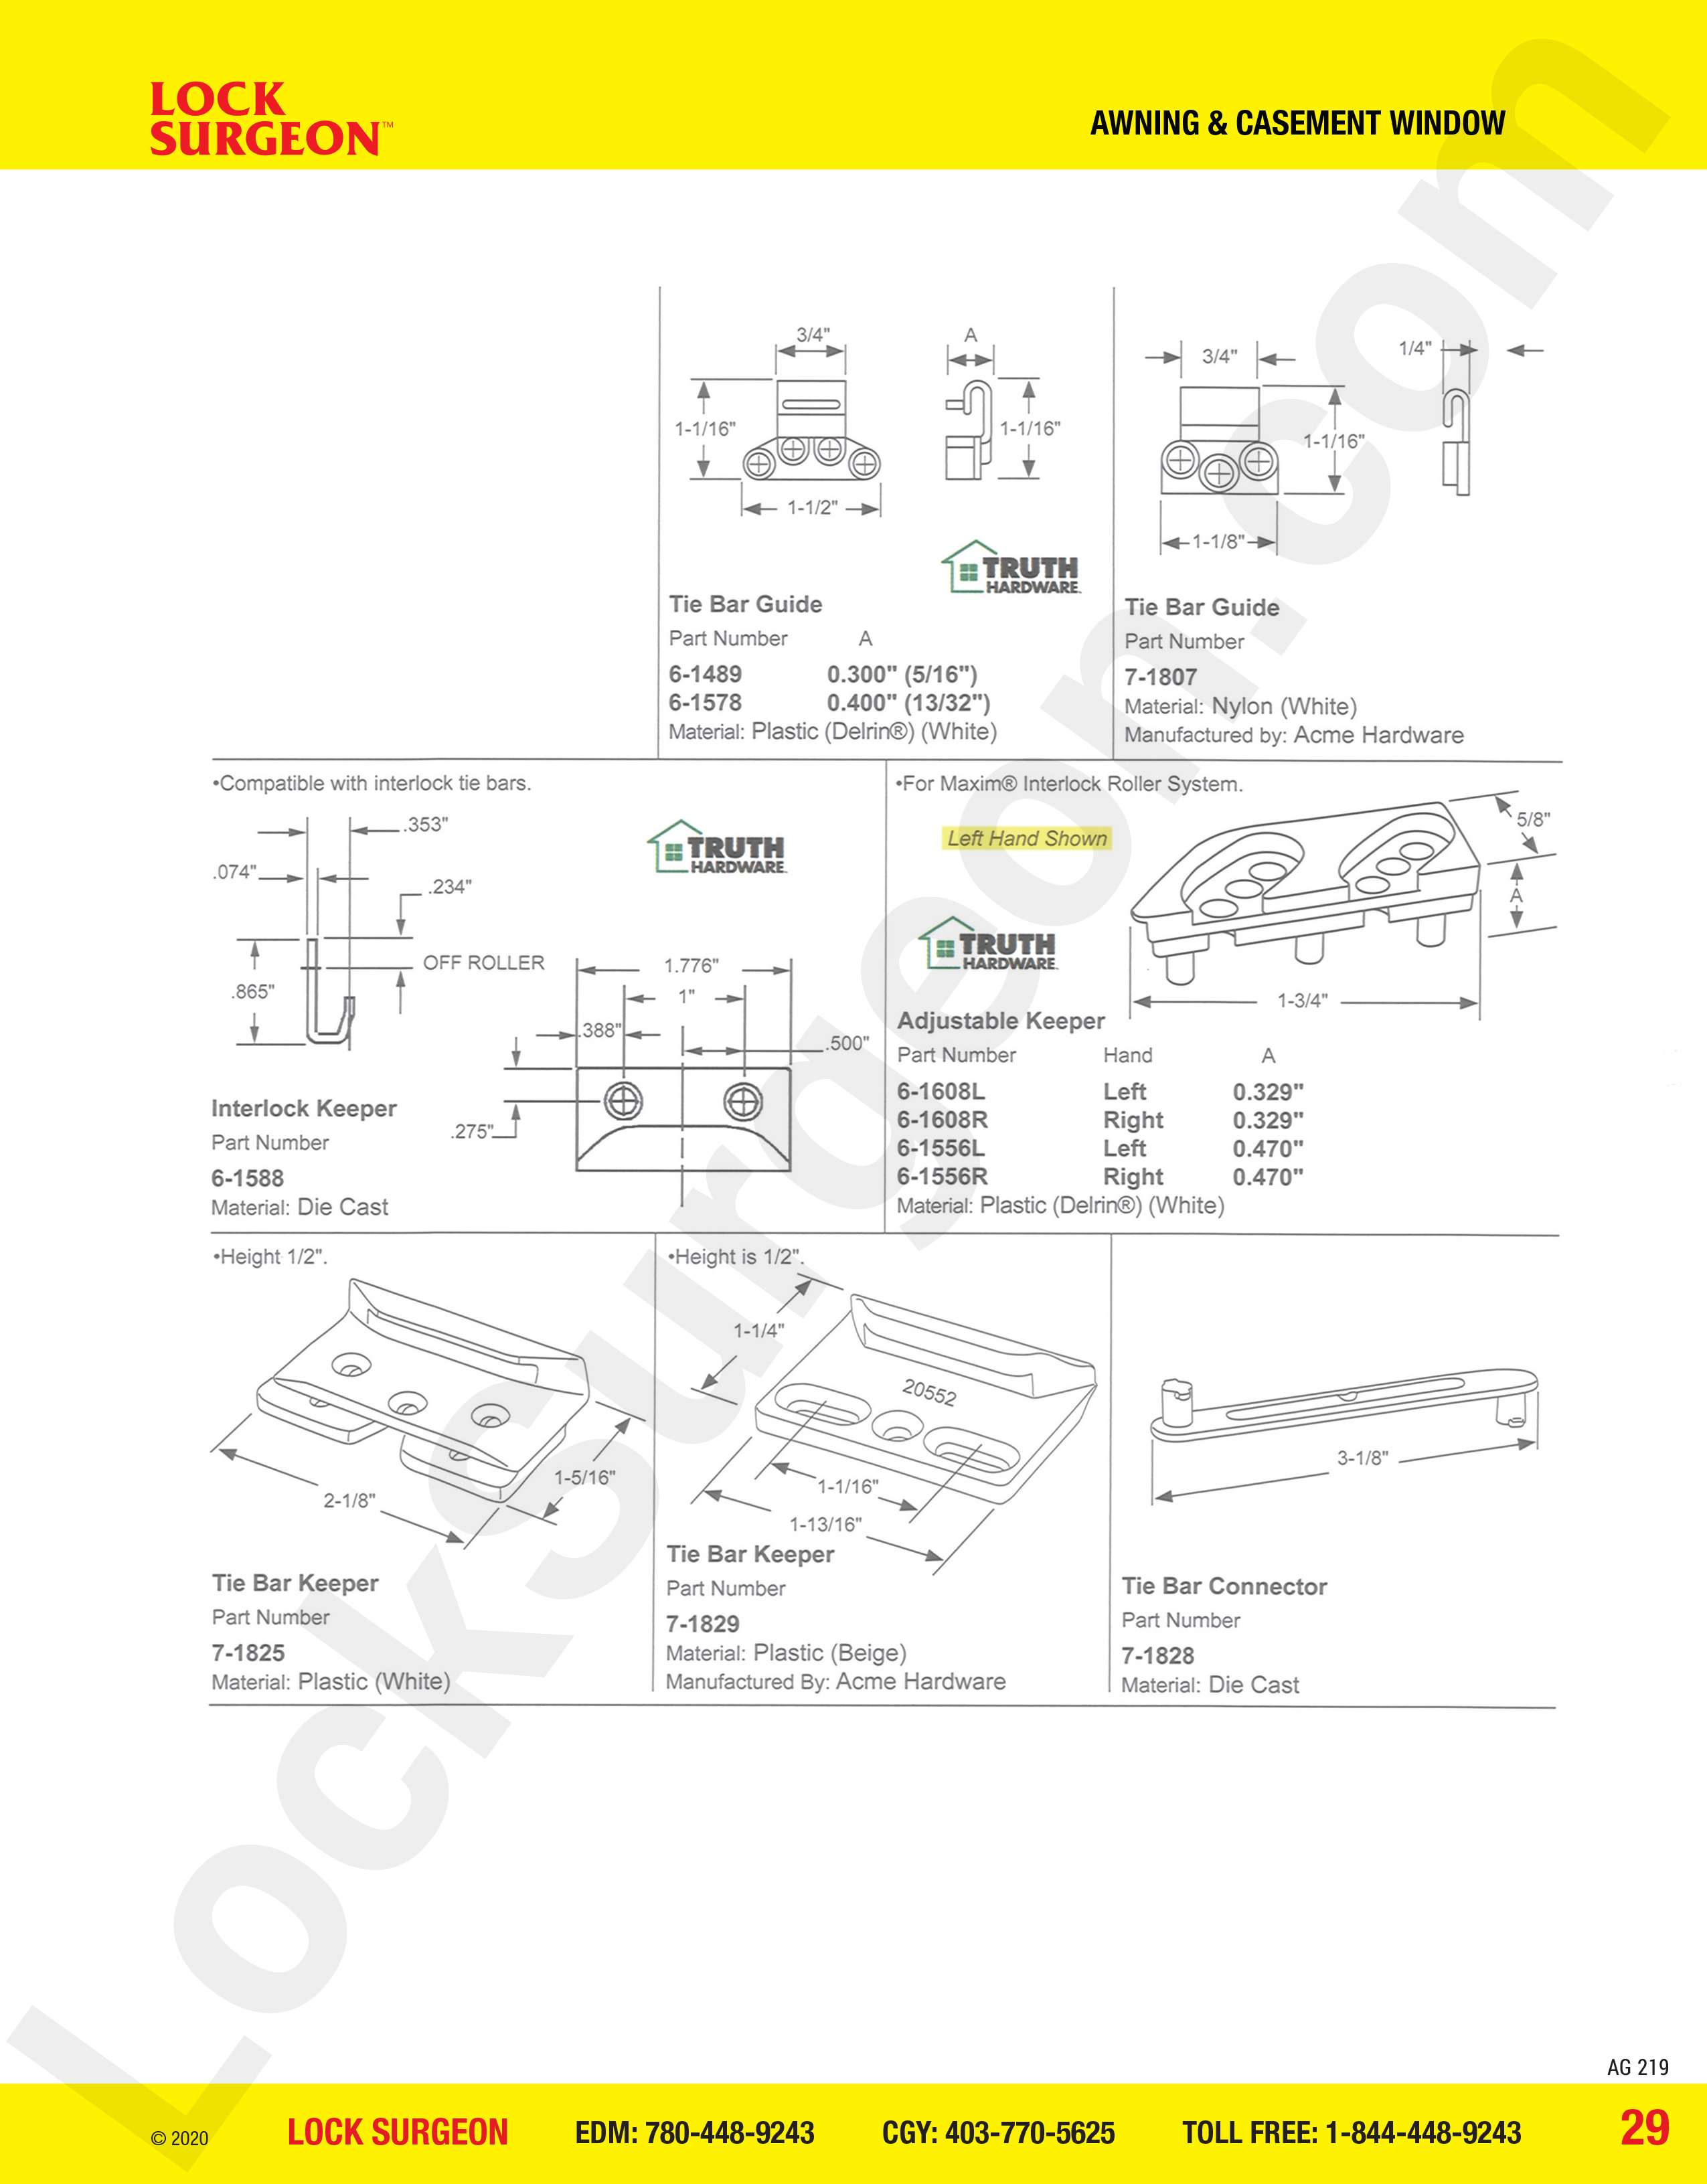 awning & casement window parts for locks.